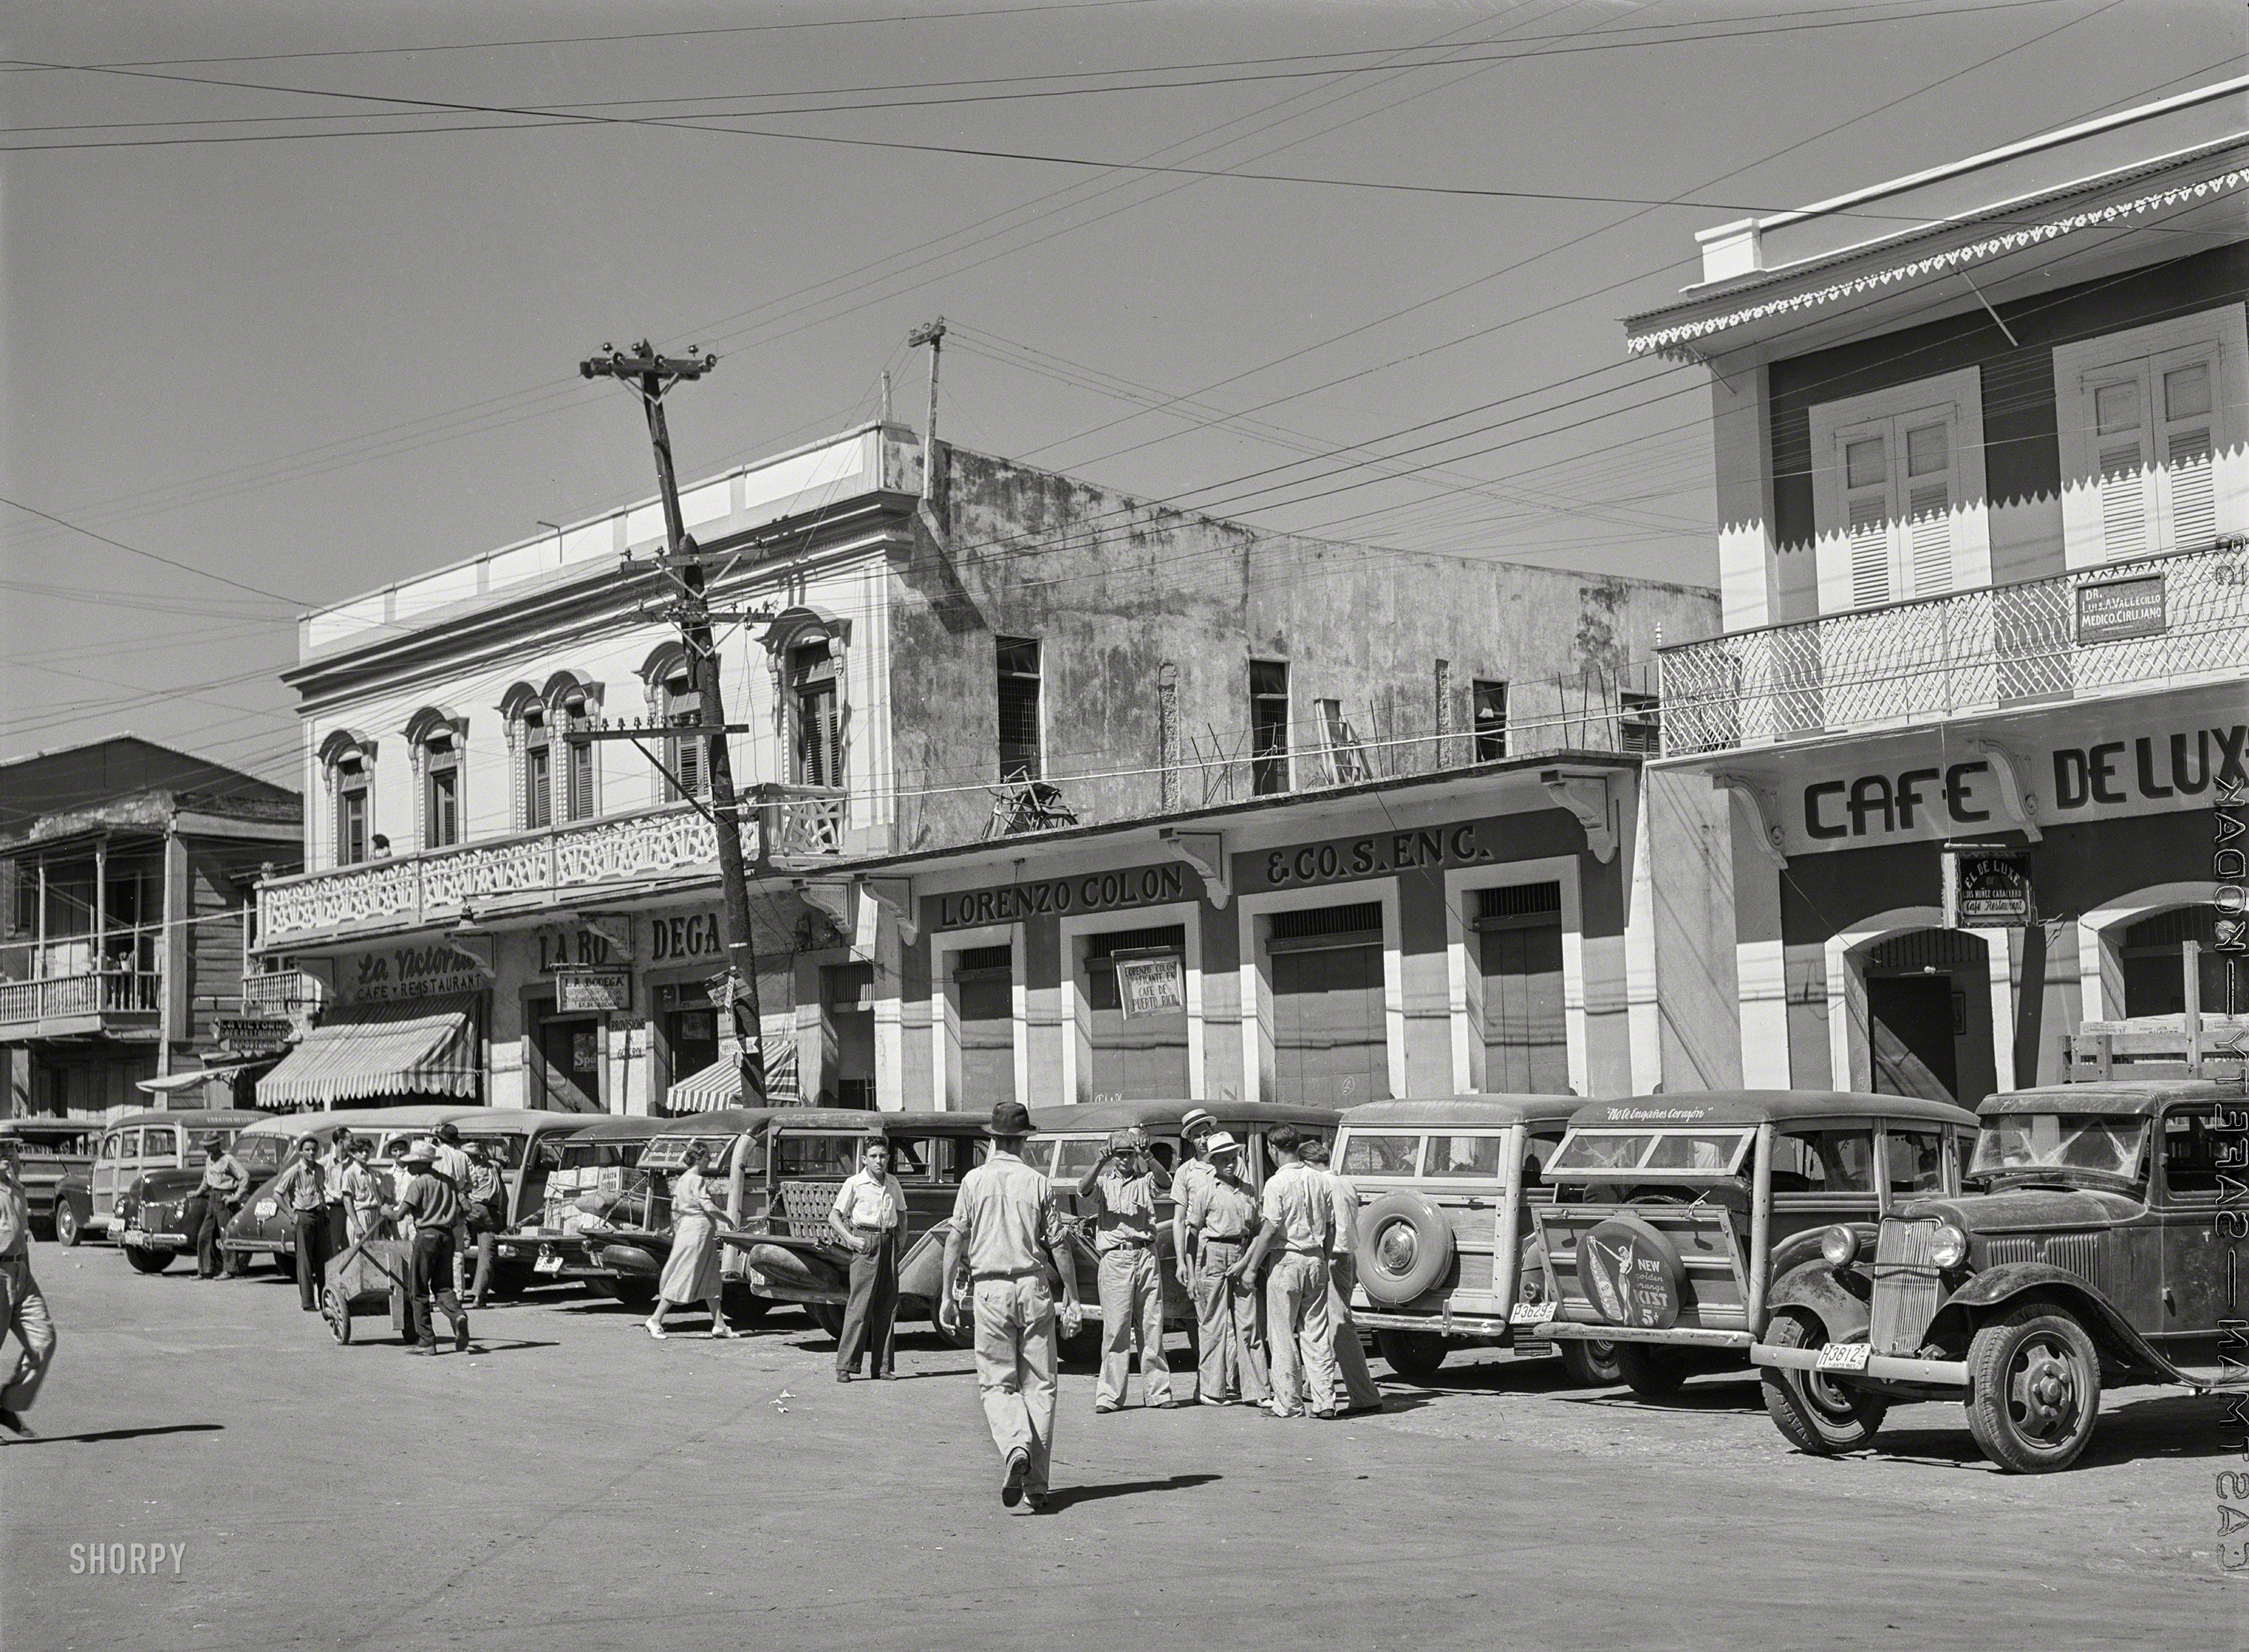 January 1942. "Arecibo, Puerto Rico. A row of station wagons or 'publicos' waiting for loads and passengers." Acetate negative by Jack Delano. View full size.